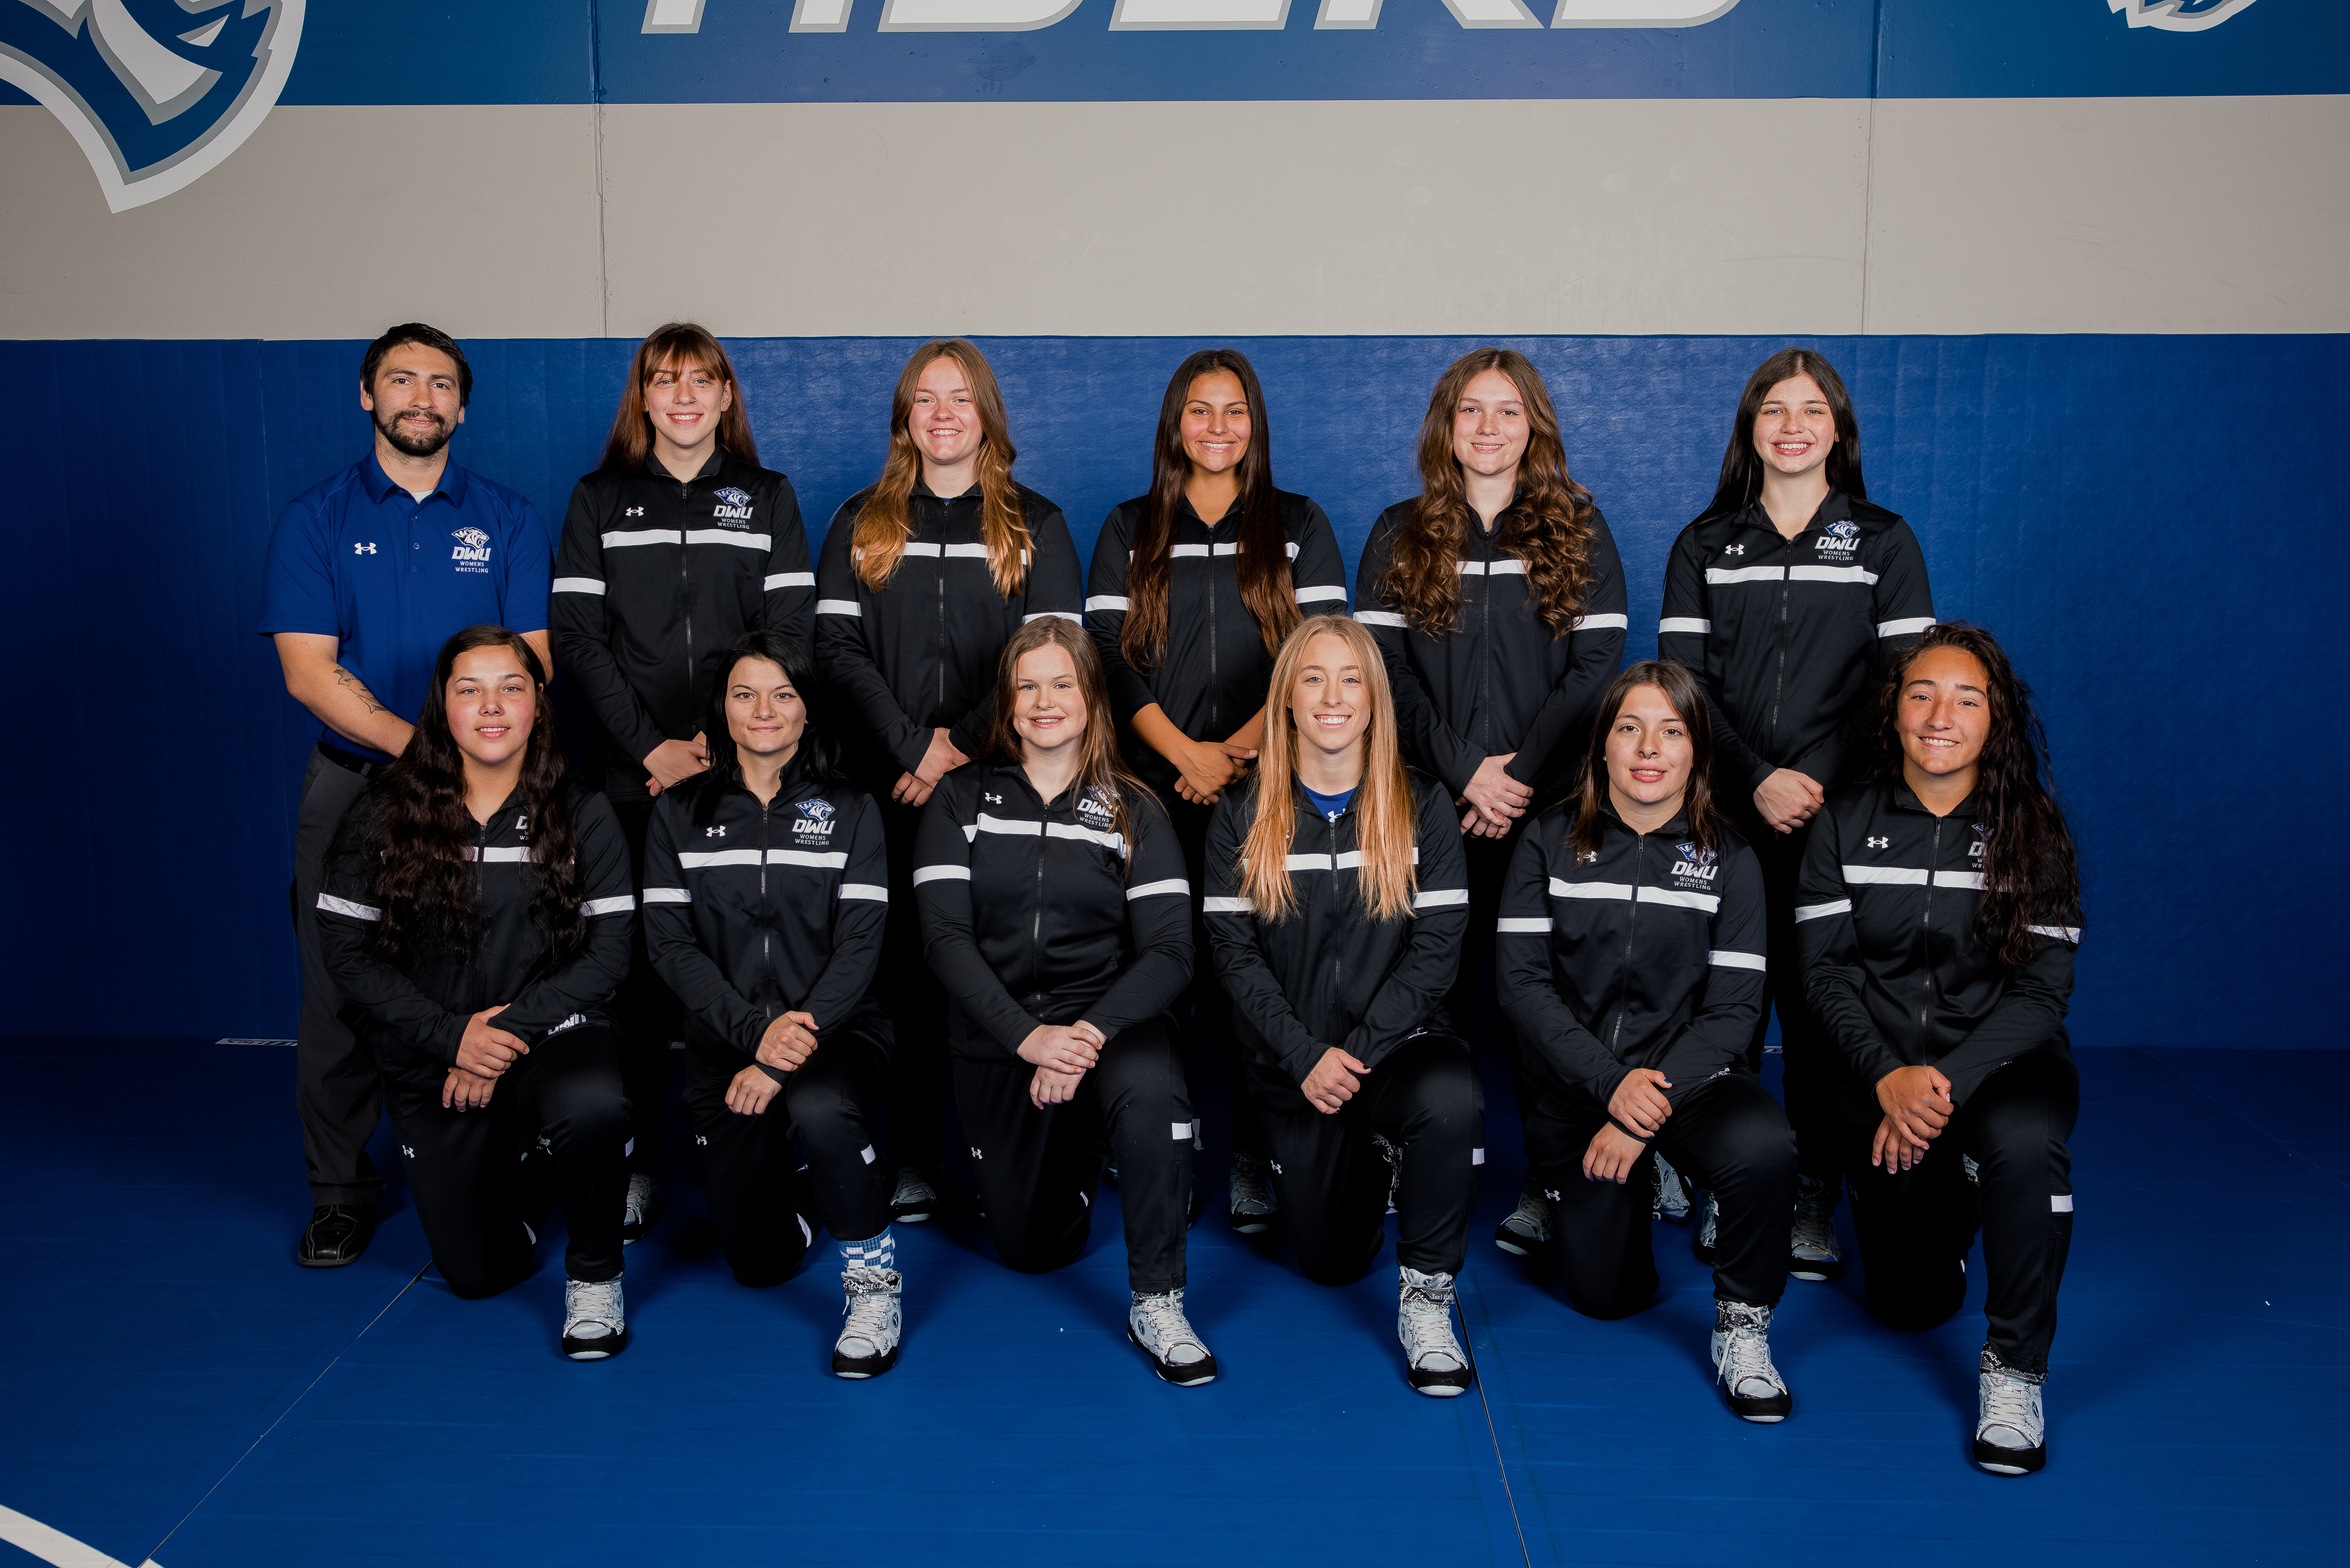 WOMEN’S WRESTLING WRAPS UP SEASON AT KCAC CHAMPIONSHIPS, SMITH SECURES 4TH PLACE